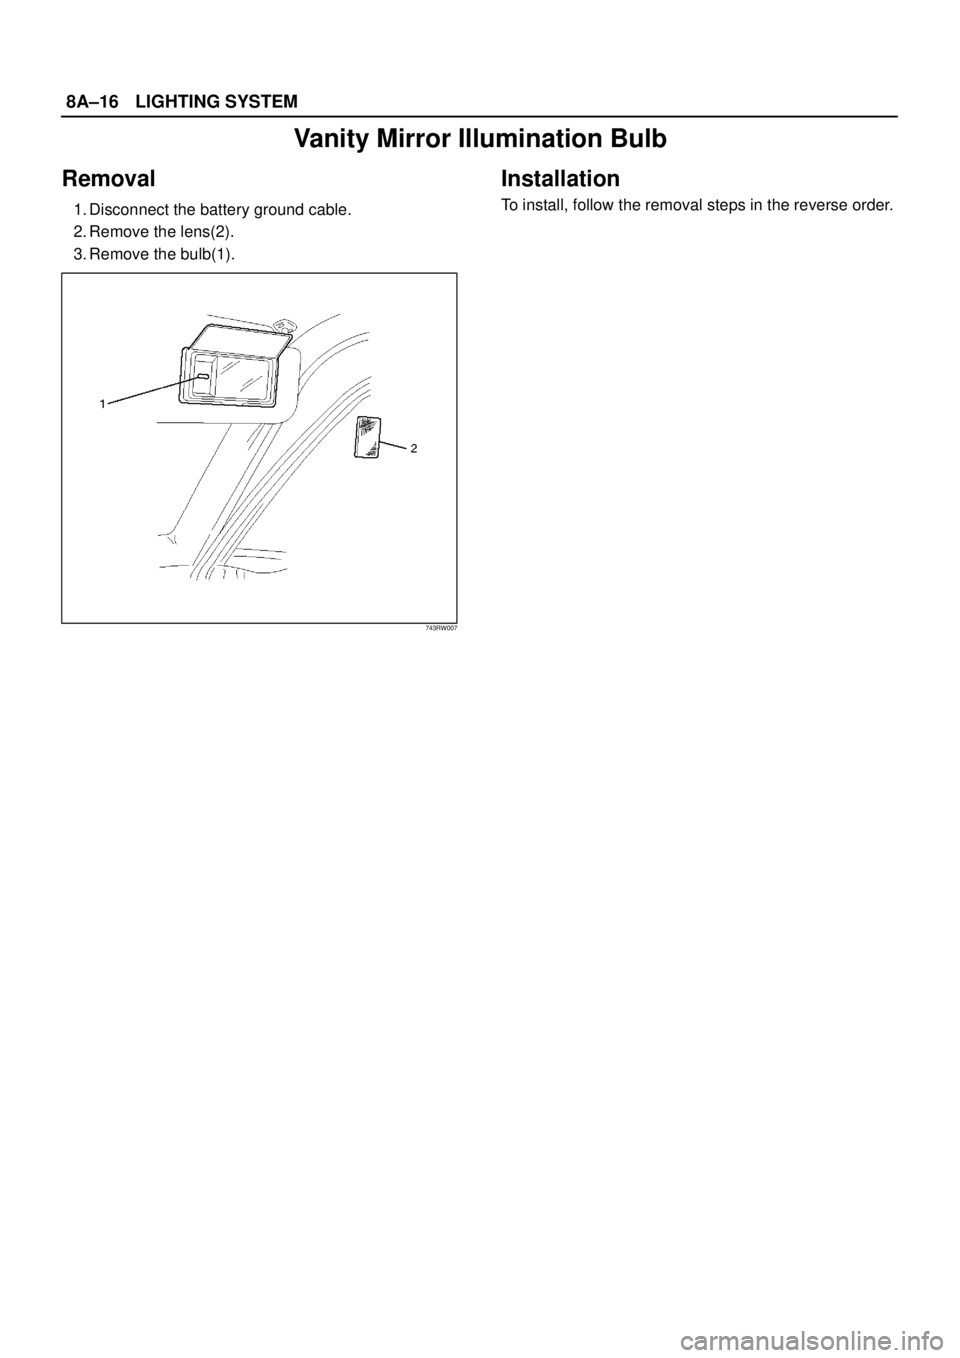 ISUZU TROOPER 1998  Service Repair Manual 8A–16LIGHTING SYSTEM
Vanity Mirror Illumination Bulb
Removal
1. Disconnect the battery ground cable.
2. Remove the lens(2).
3. Remove the bulb(1).
743RW007
Installation 
To install, follow the remov